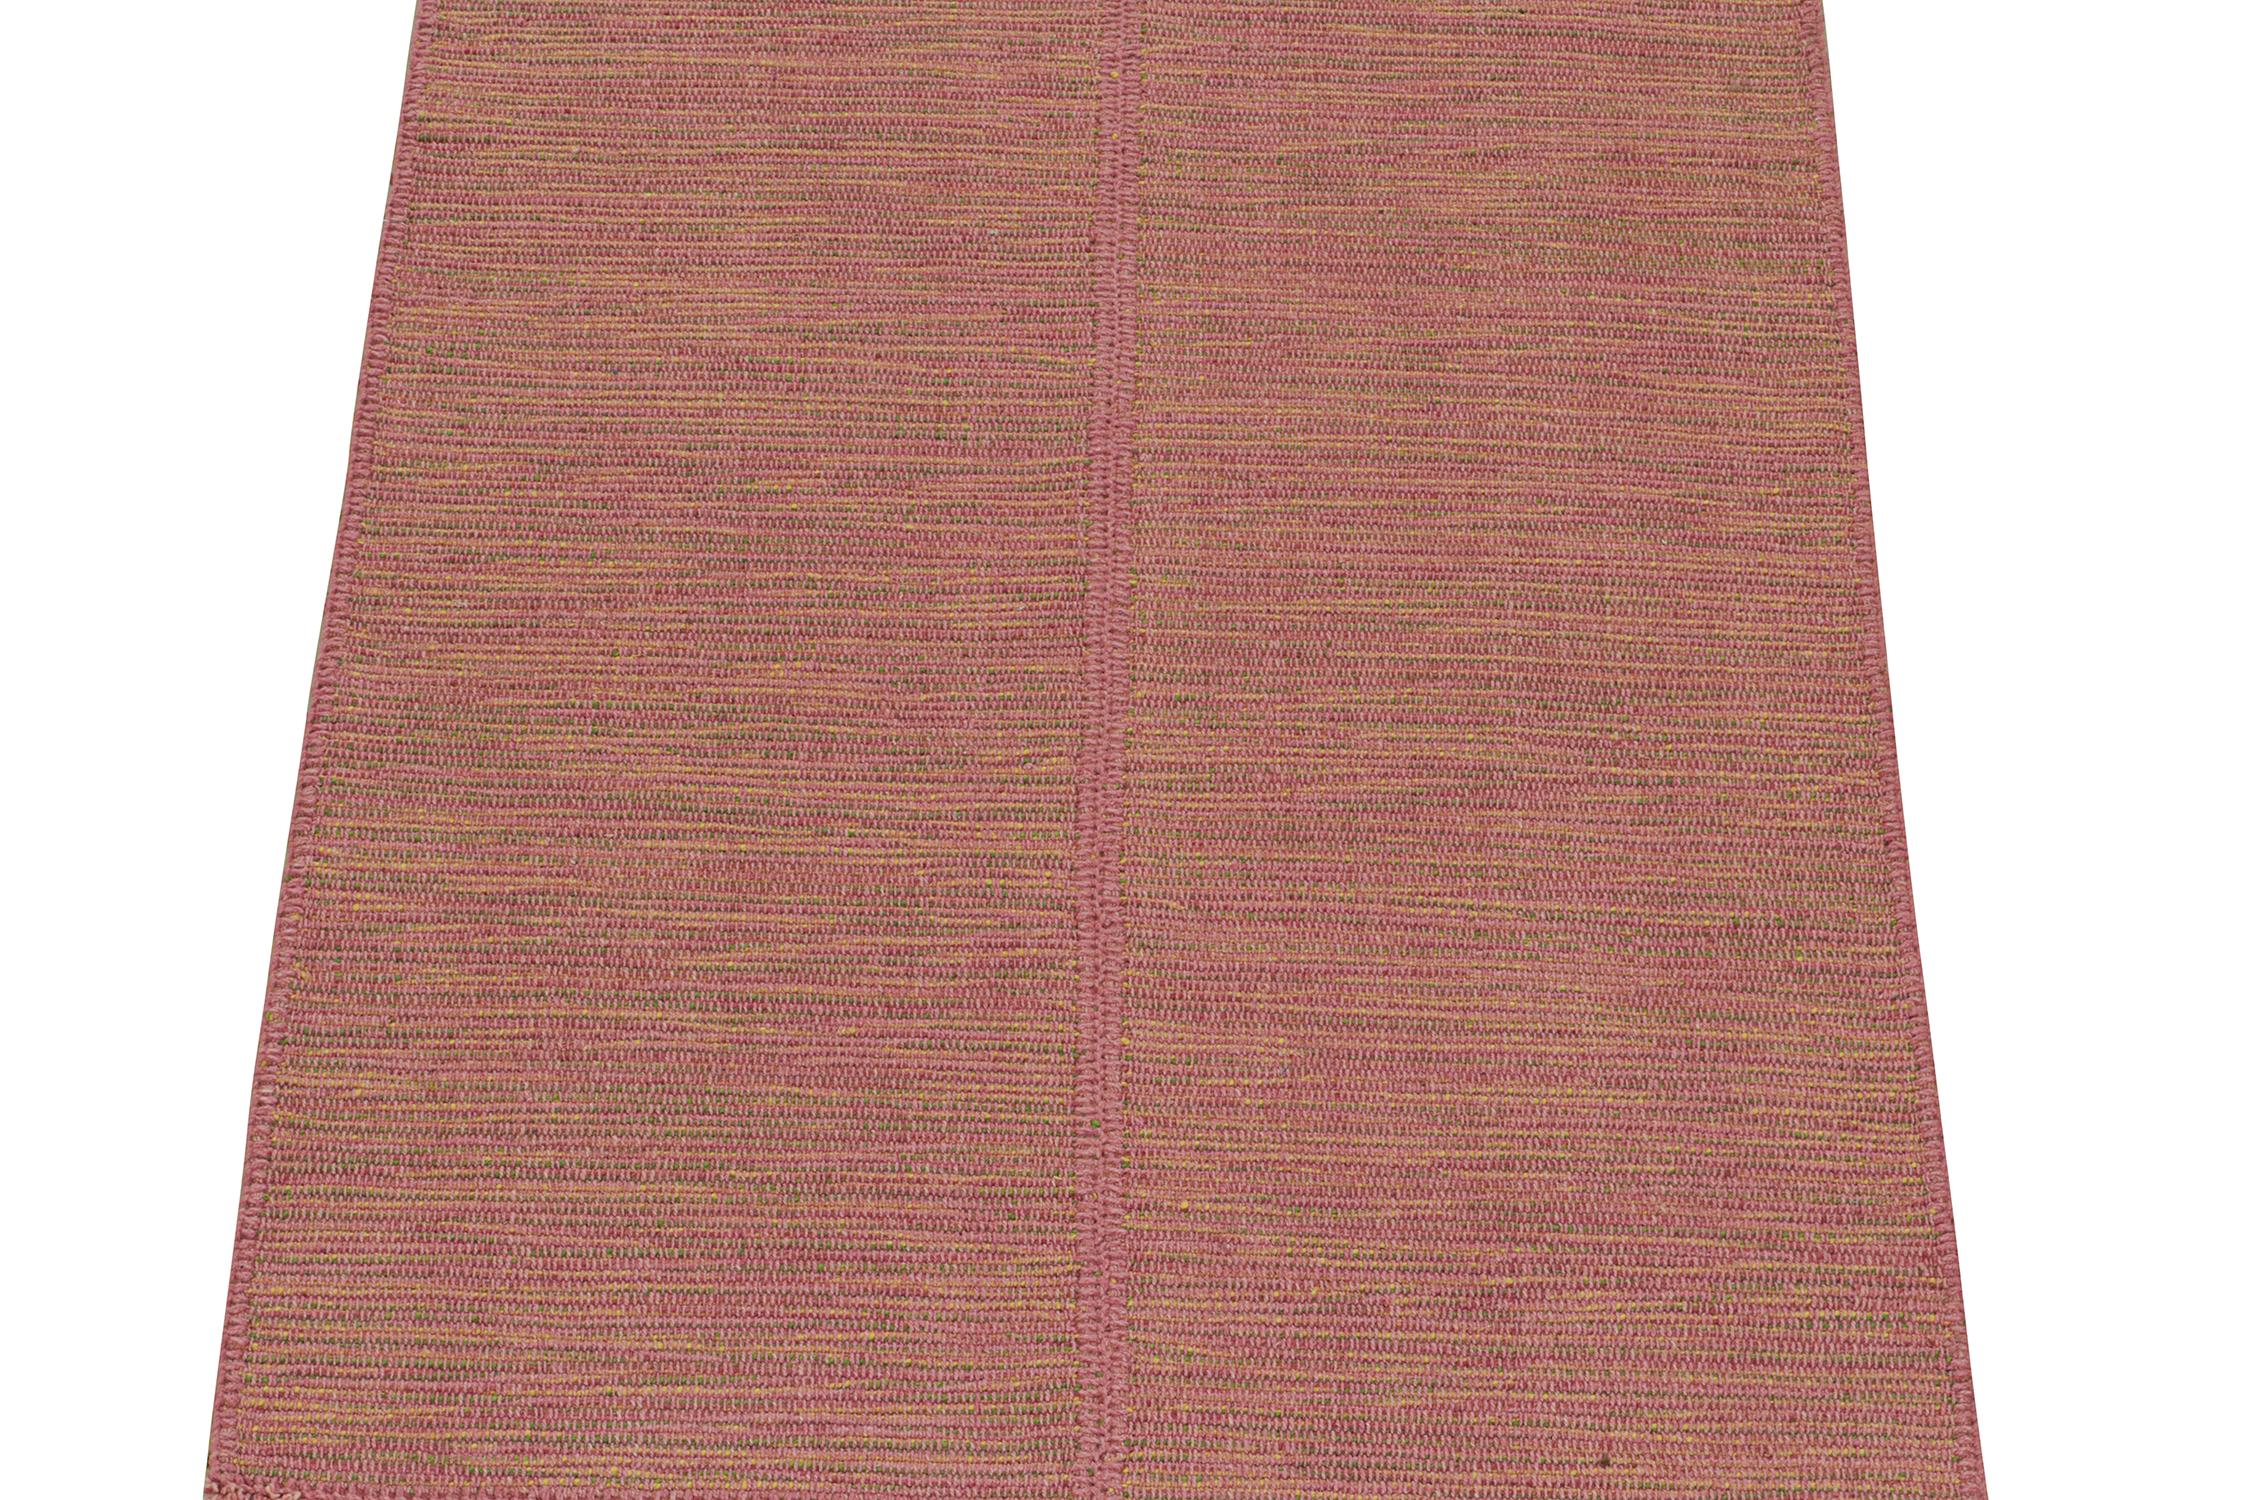 Handwoven in wool, this 4x5 Kilim is from a bold new line of contemporary flatweaves by Rug & Kilim.
Further On the Design:

The “Rez Kilim” connotes a modern take on classic panel weaving. This edition enjoys bright tones of pink with yellow and